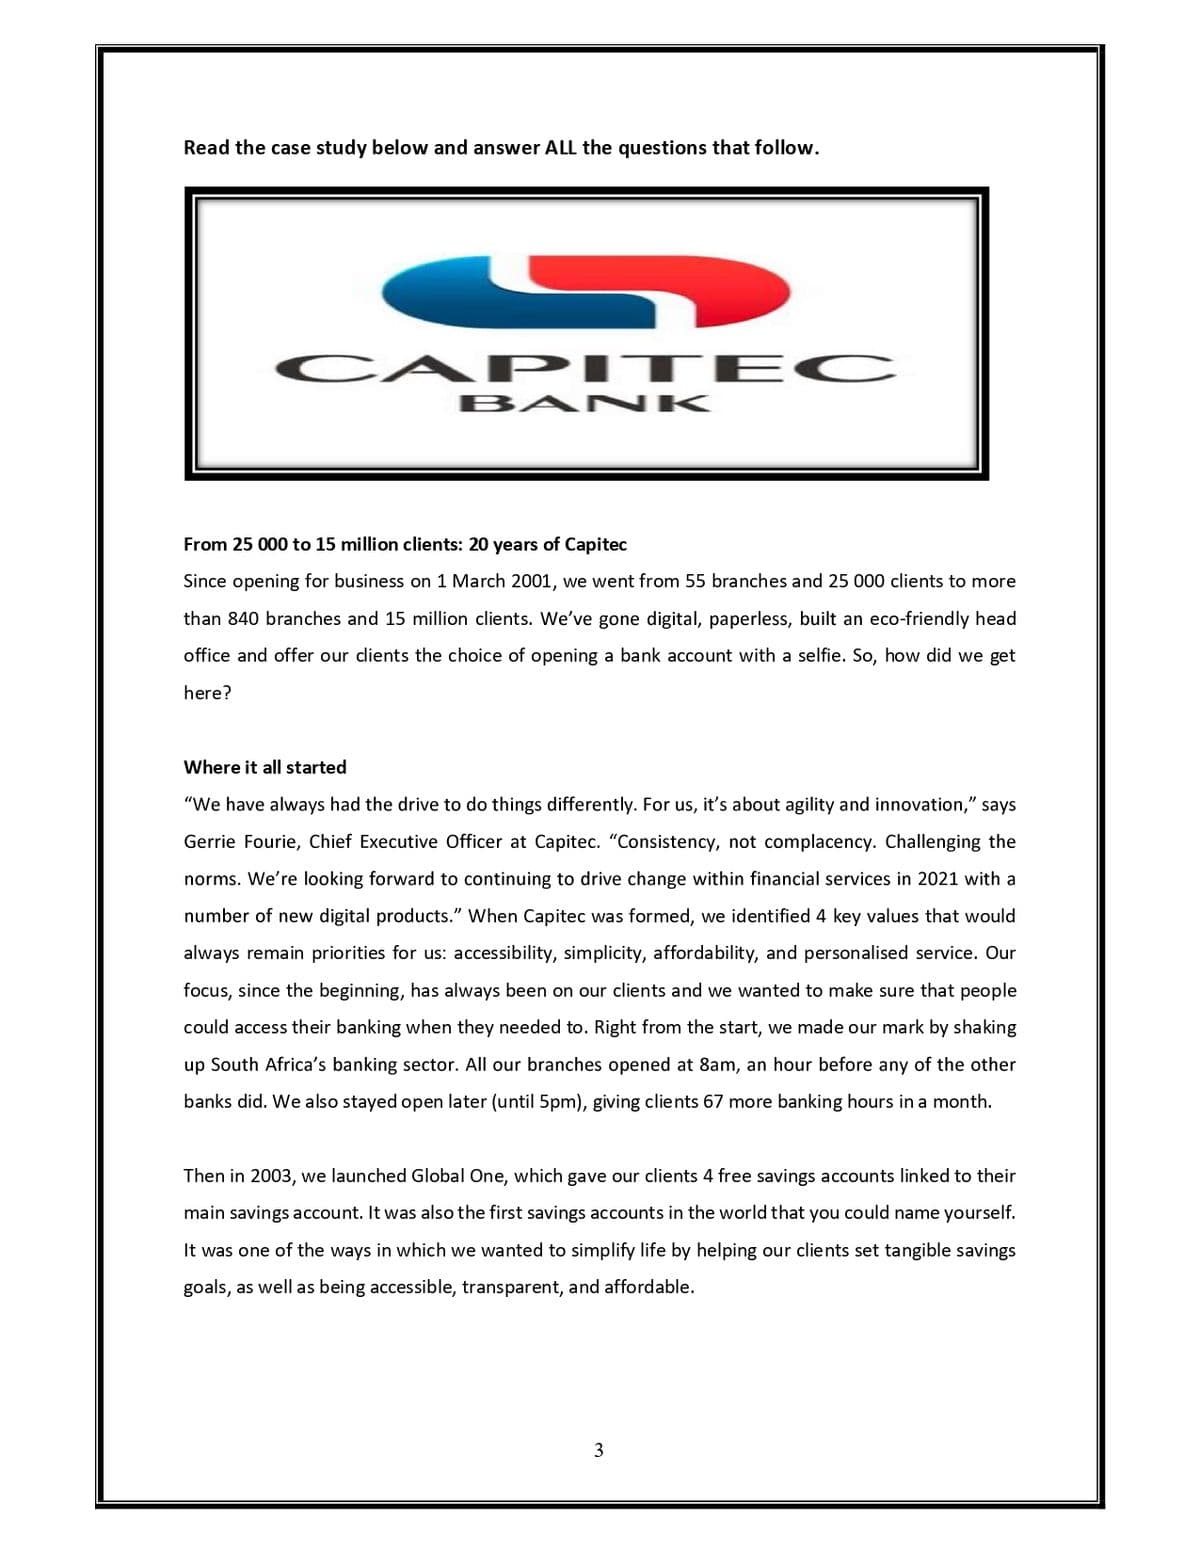 Read the case study below and answer ALL the questions that follow.
S
CAPITEC
BANK
From 25 000 to 15 million clients: 20 years of Capitec
Since opening for business on 1 March 2001, we went from 55 branches and 25 000 clients to more
than 840 branches and 15 million clients. We've gone digital, paperless, built an eco-friendly head
office and offer our clients the choice of opening a bank account with a selfie. So, how did we get
here?
Where it all started
"We have always had the drive to do things differently. For us, it's about agility and innovation," says
Gerrie Fourie, Chief Executive Officer at Capitec. “Consistency, not complacency. Challenging the
norms. We're looking forward to continuing to drive change within financial services in 2021 with a
number of new digital products." When Capitec was formed, we identified 4 key values that would
always remain priorities for us: accessibility, simplicity, affordability, and personalised service. Our
focus, since the beginning, has always been on our clients and we wanted to make sure that people
could access their banking when they needed to. Right from the start, we made our mark by shaking
up South Africa's banking sector. All our branches opened at 8am, an hour before any of the other
banks did. We also stayed open later (until 5pm), giving clients 67 more banking hours in a month.
Then in 2003, we launched Global One, which gave our clients 4 free savings accounts linked to their
main savings account. It was also the first savings accounts in the world that you could name yourself.
It was one of the ways in which we wanted to simplify life by helping our clients set tangible savings
goals, as well as being accessible, transparent, and affordable.
3